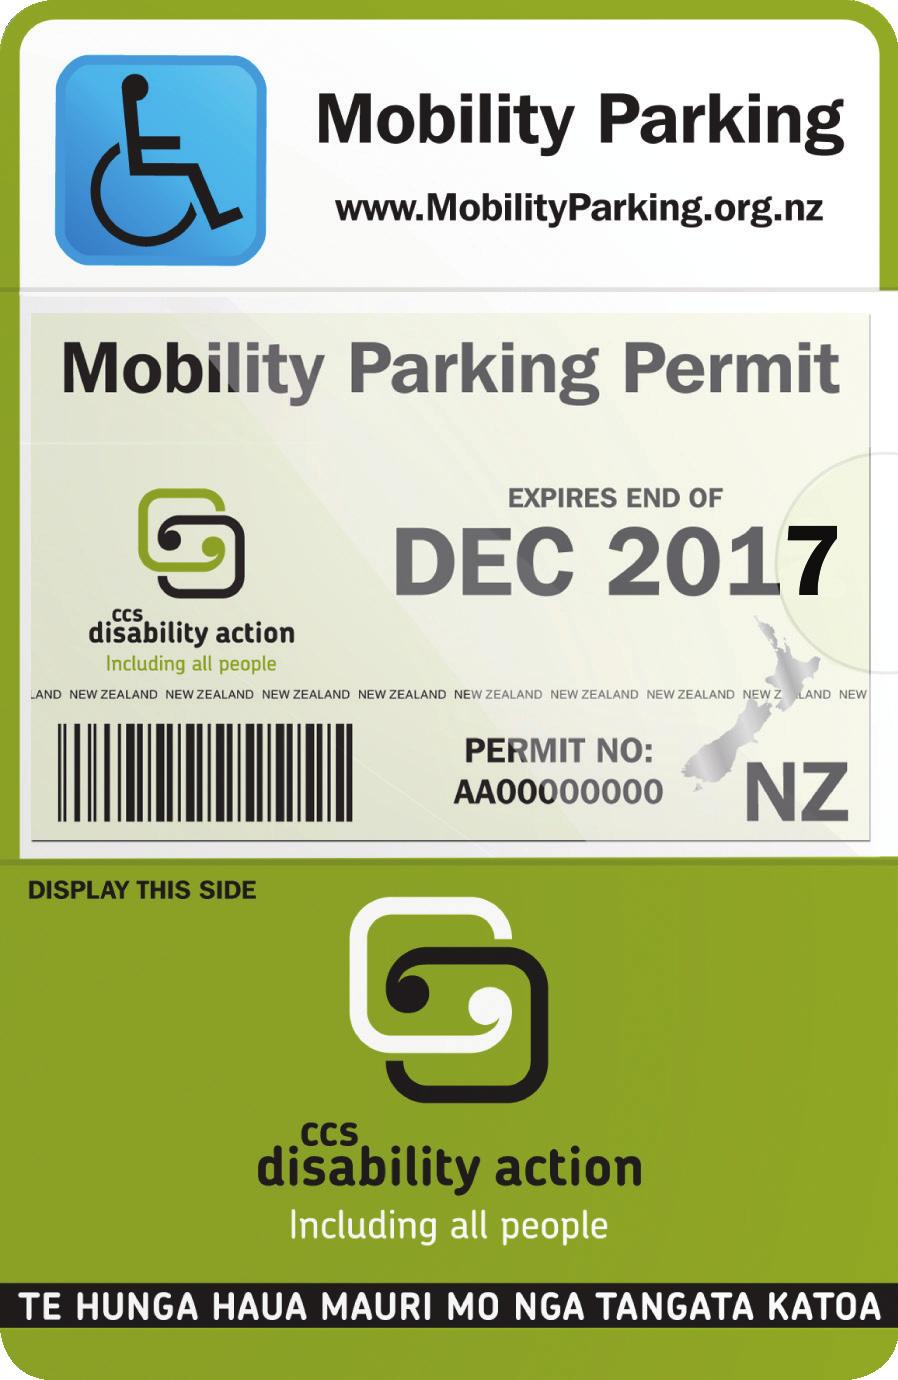 using this form or online at www.mobilityparking.org.